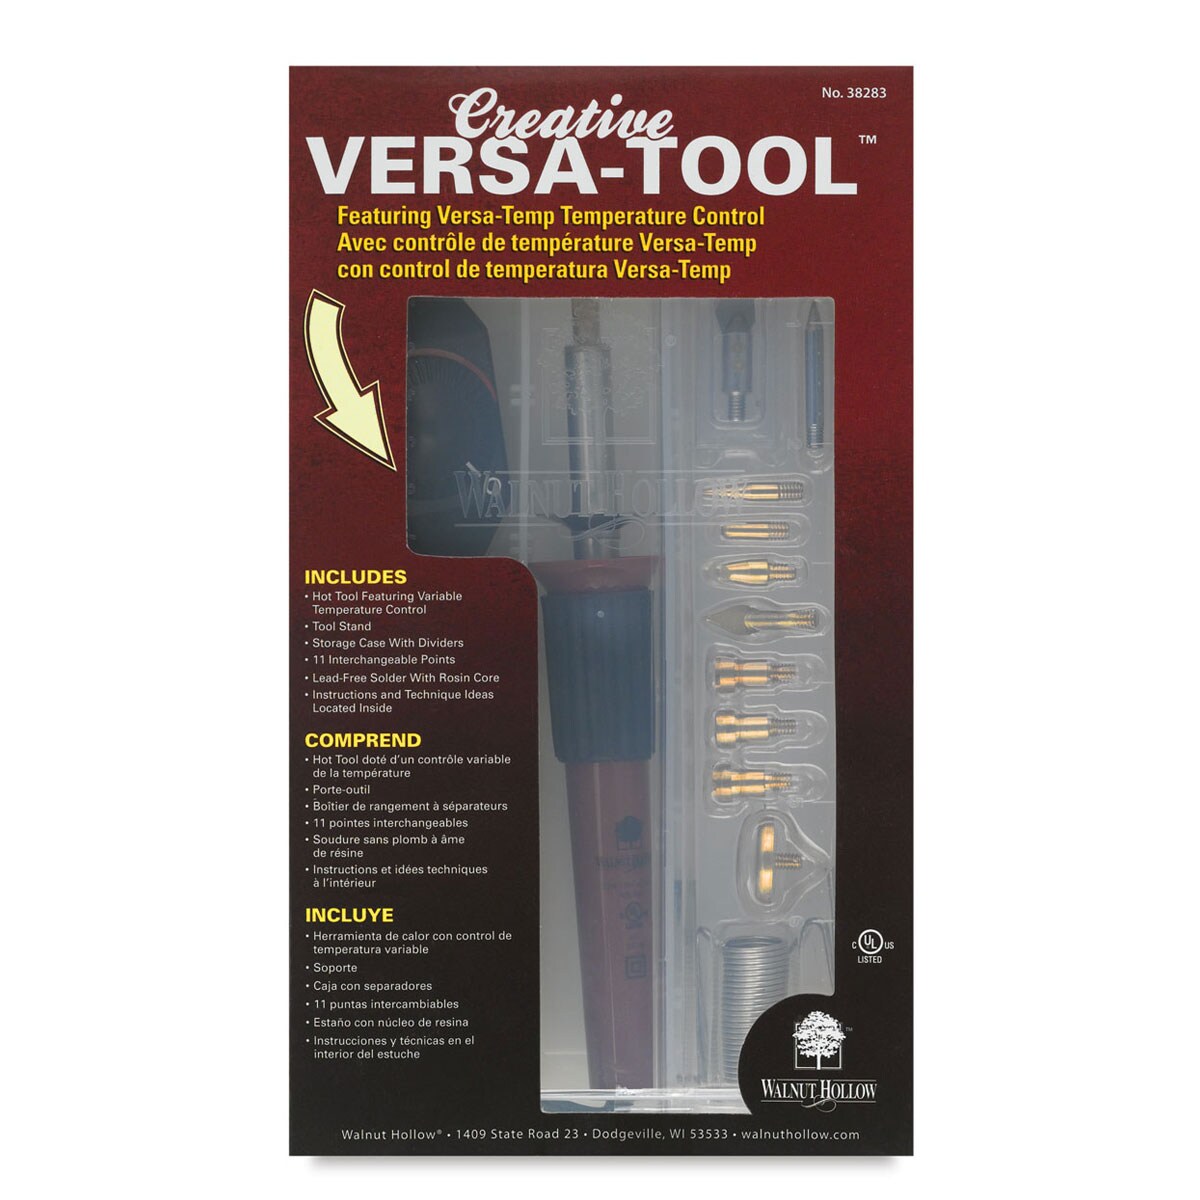 Walnut Hollow Creative Versa Tool with Variable Temperature